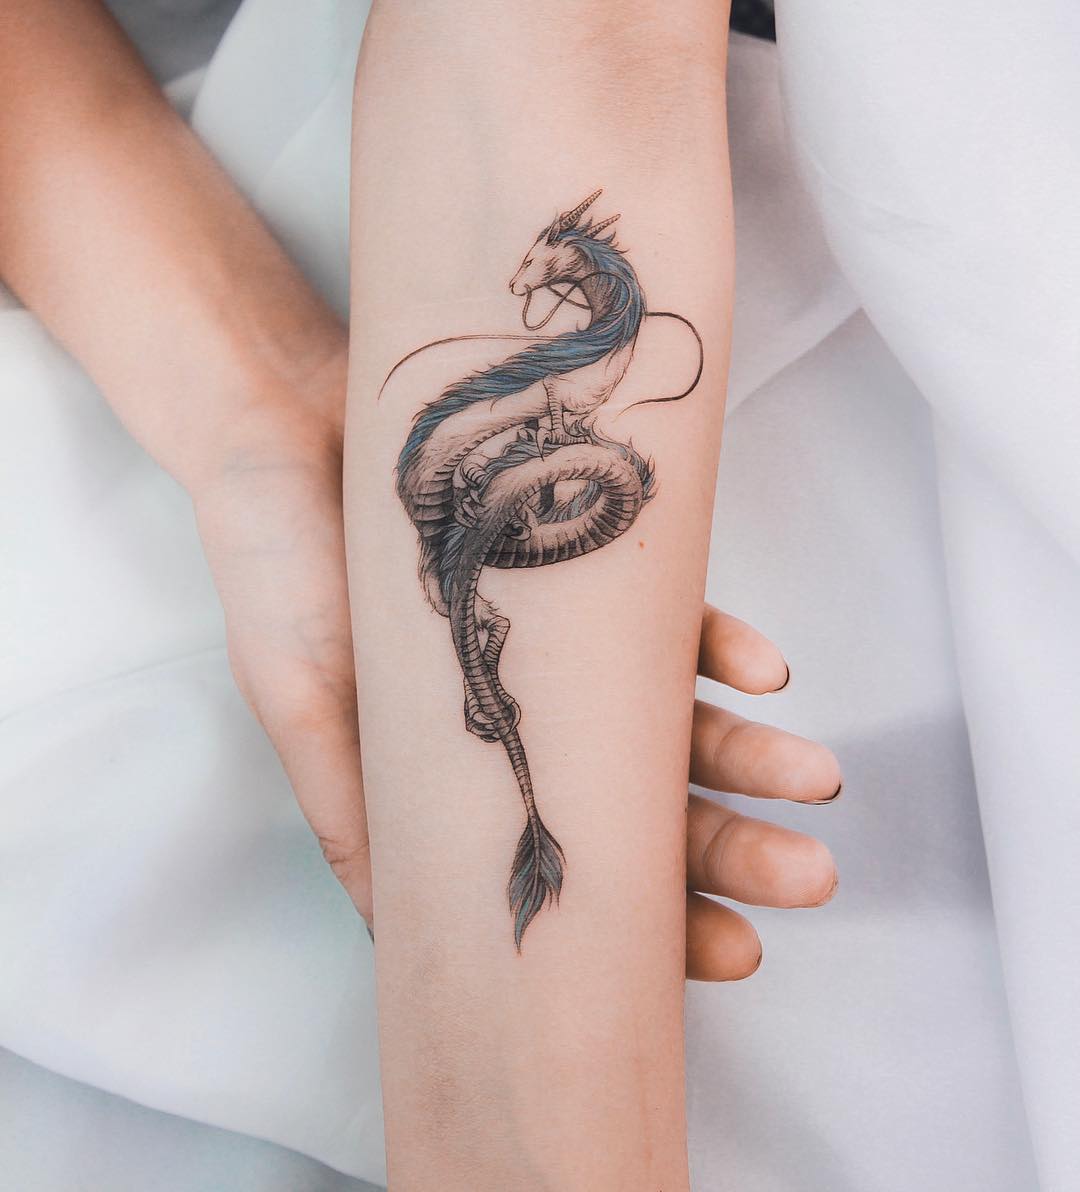 Haku from Spirited Away as a scar cover-up by @ghinkos